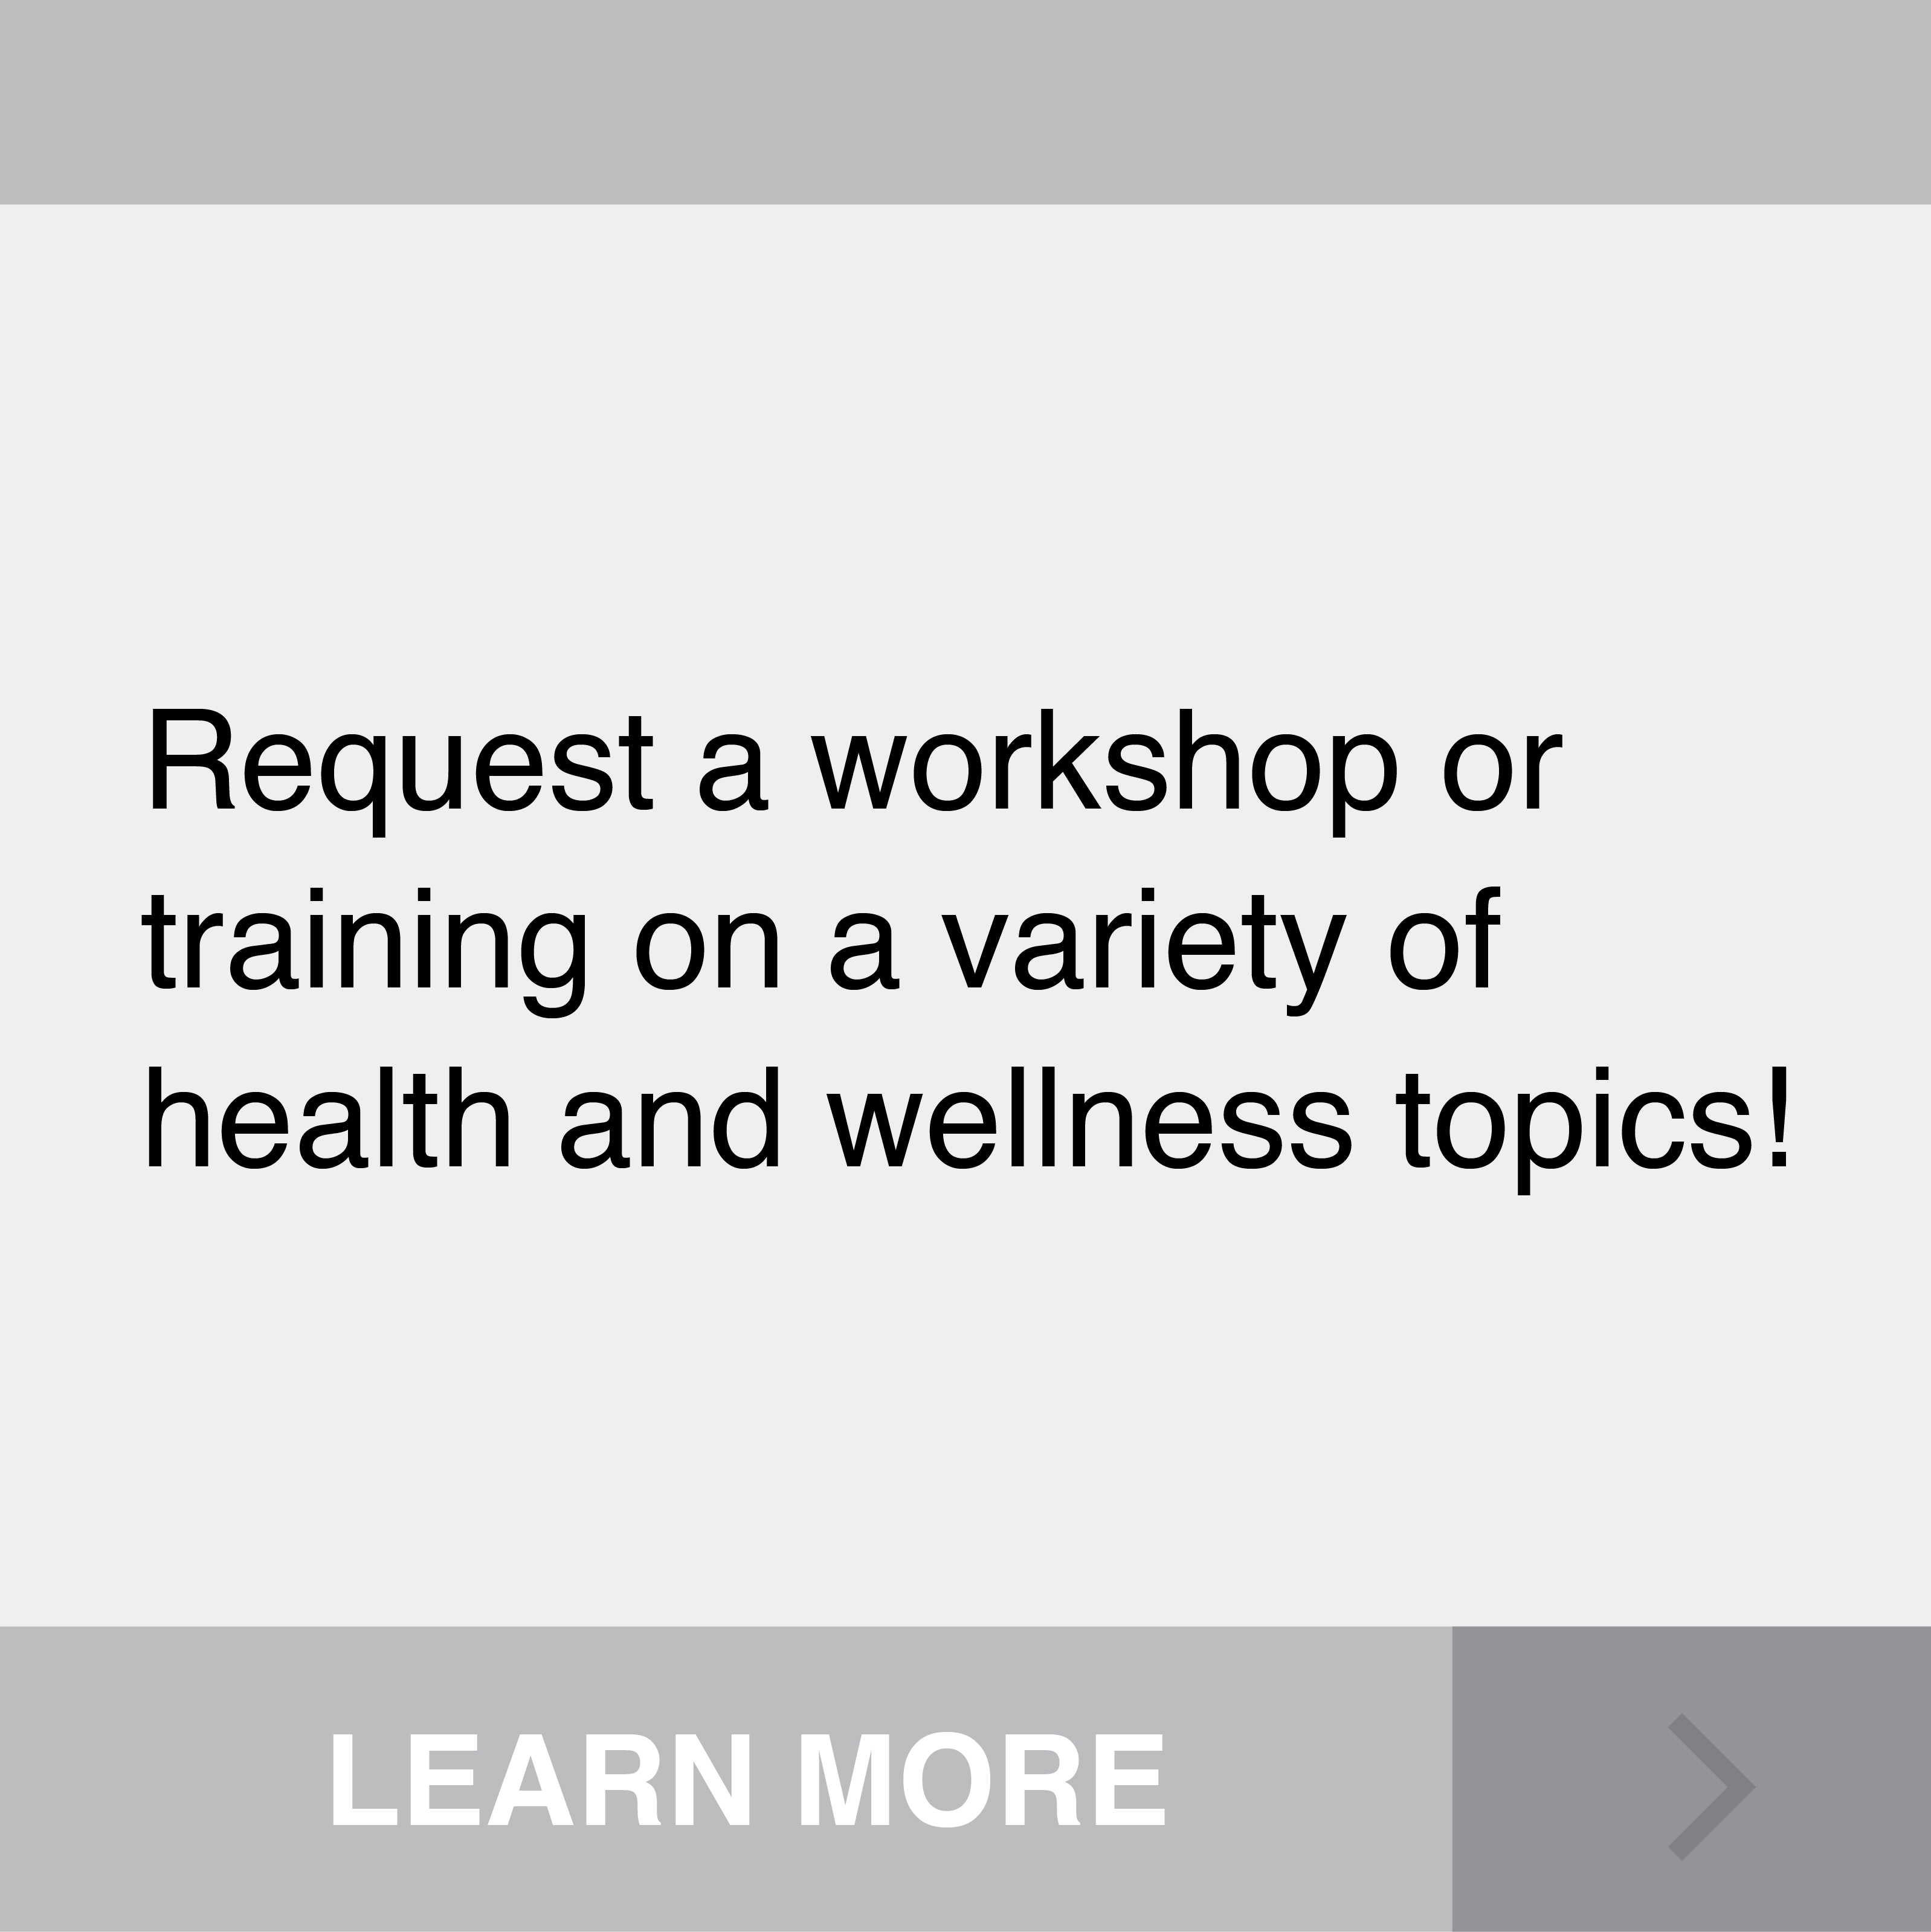 Request a workshop or training on a variety of health and wellness topics! Click to Learn More.